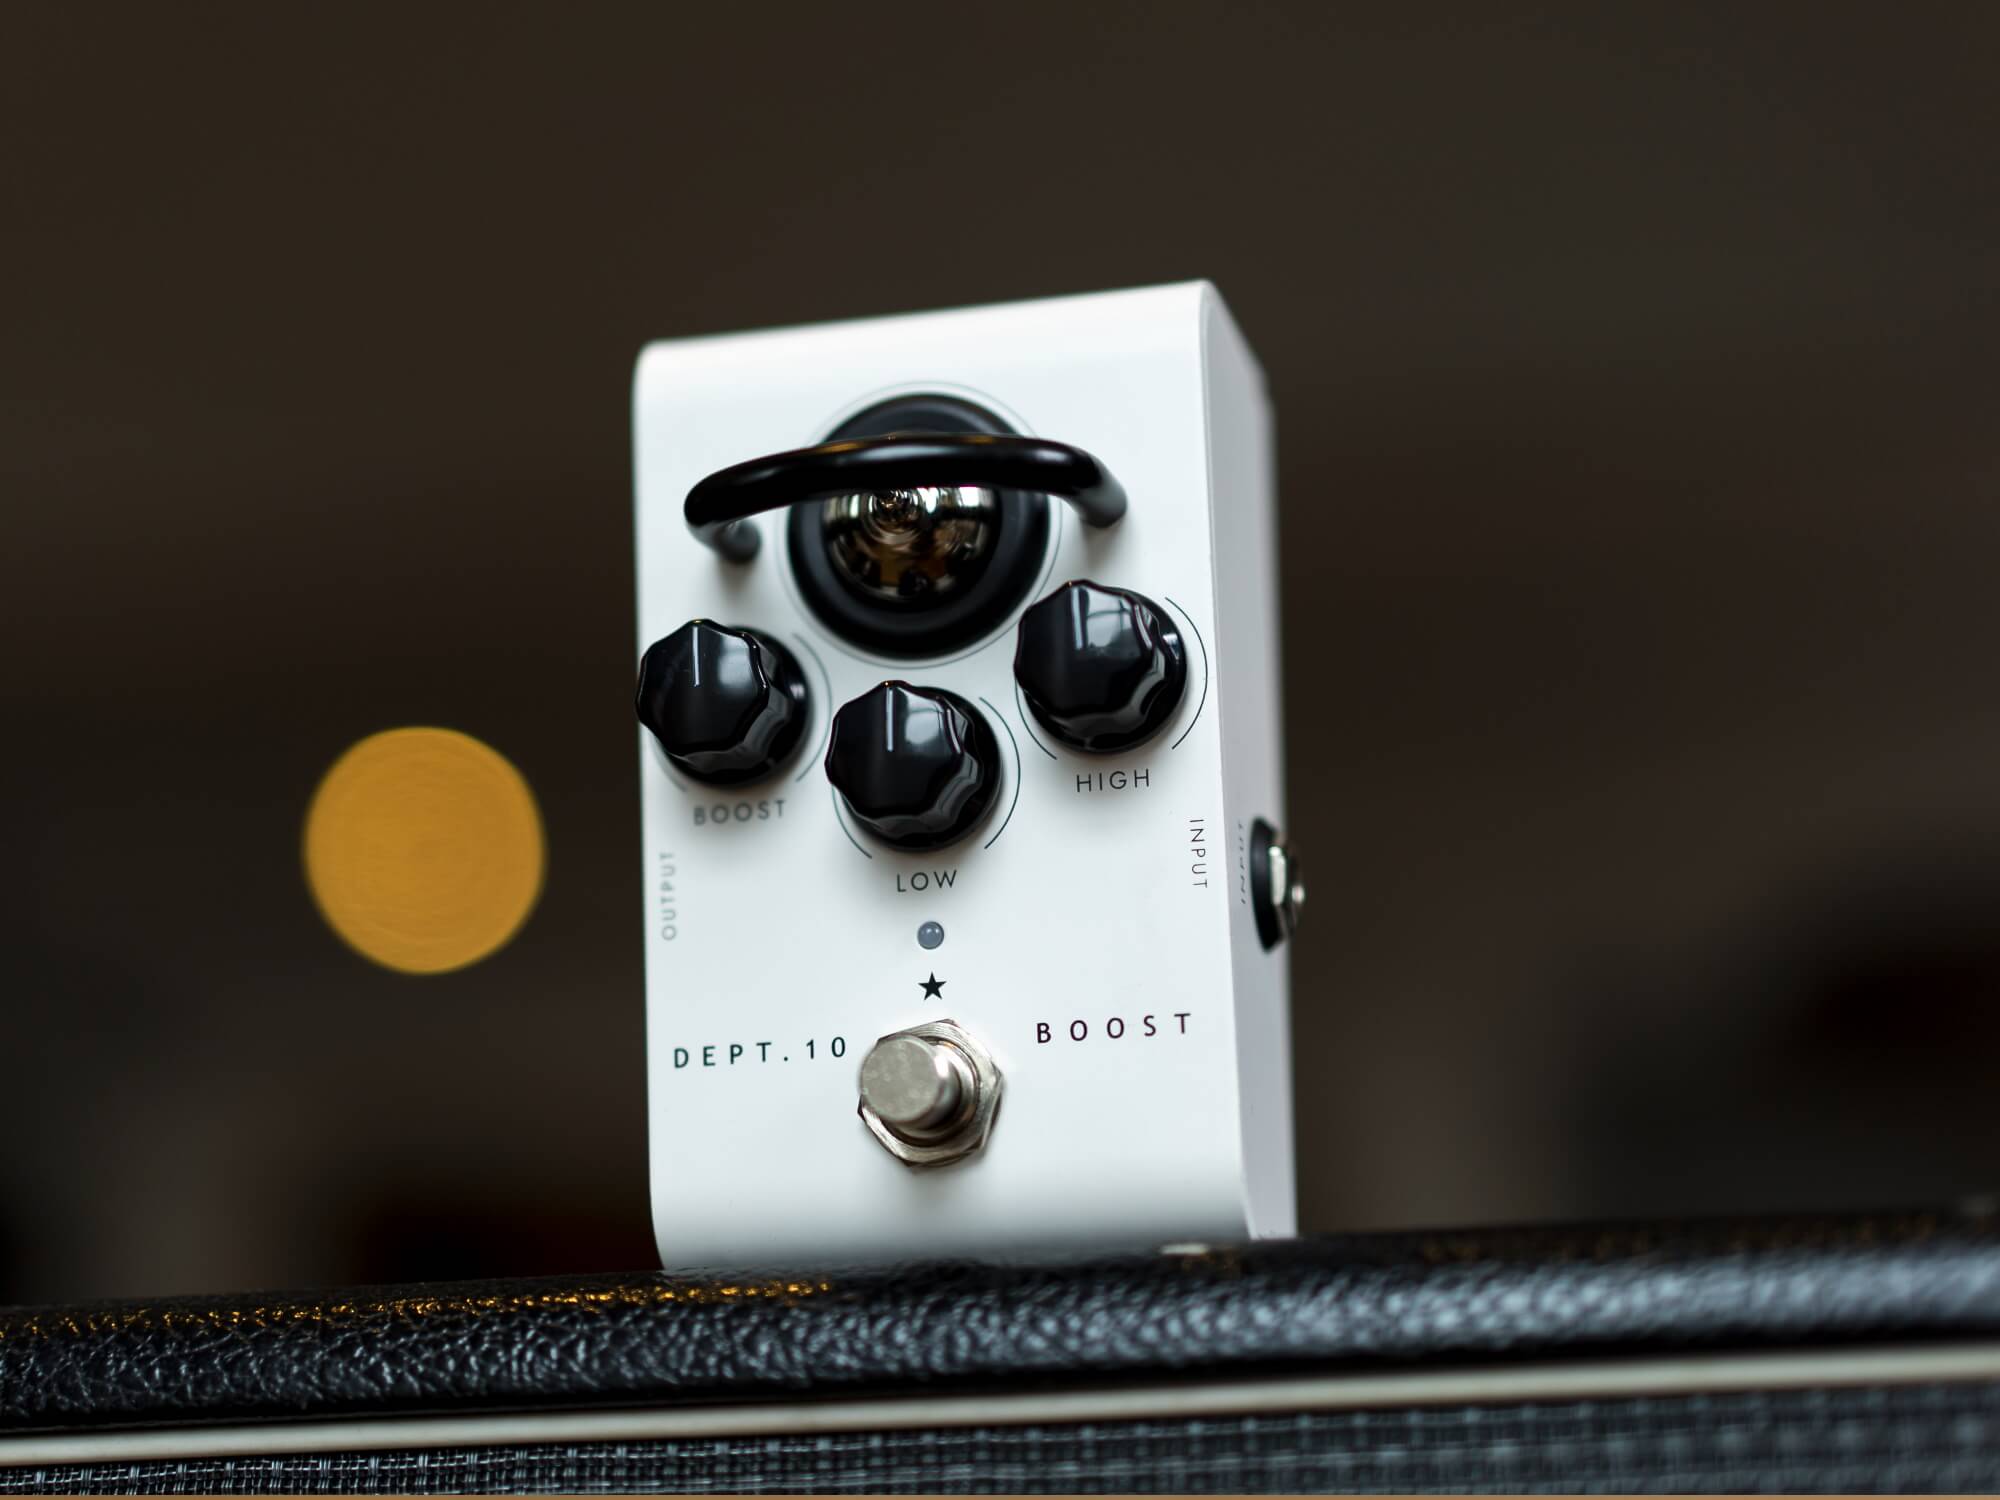 Blackstar's Dept. 10 pedals match the natural feel of valve amps